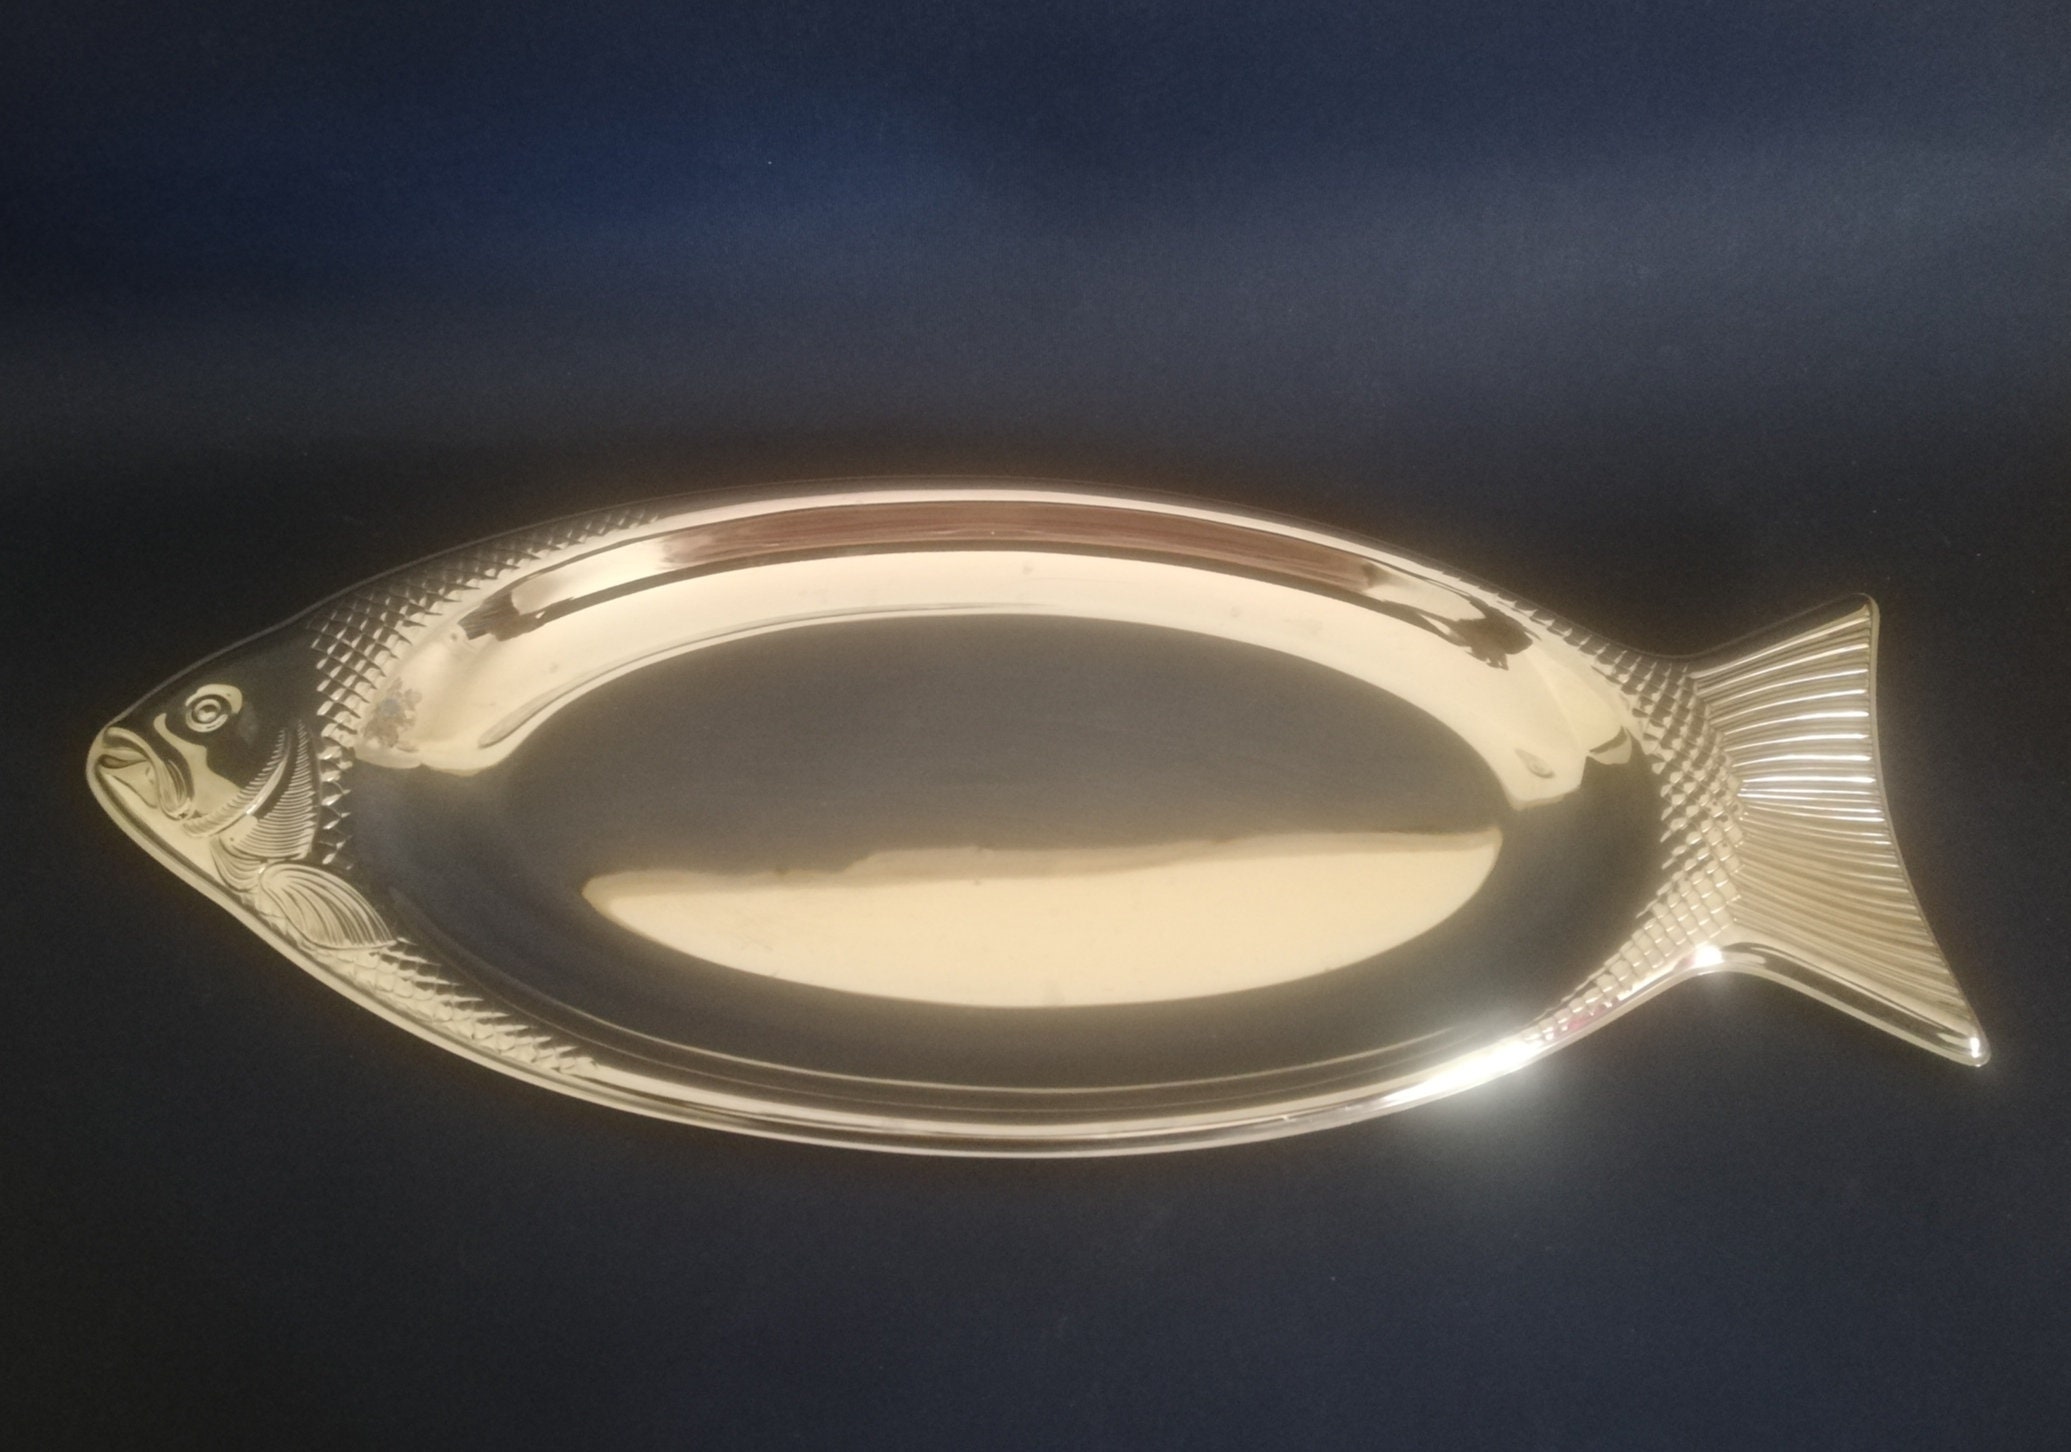 Stainless Steel Fish Shaped Platter, Made in Germany Serving Dish